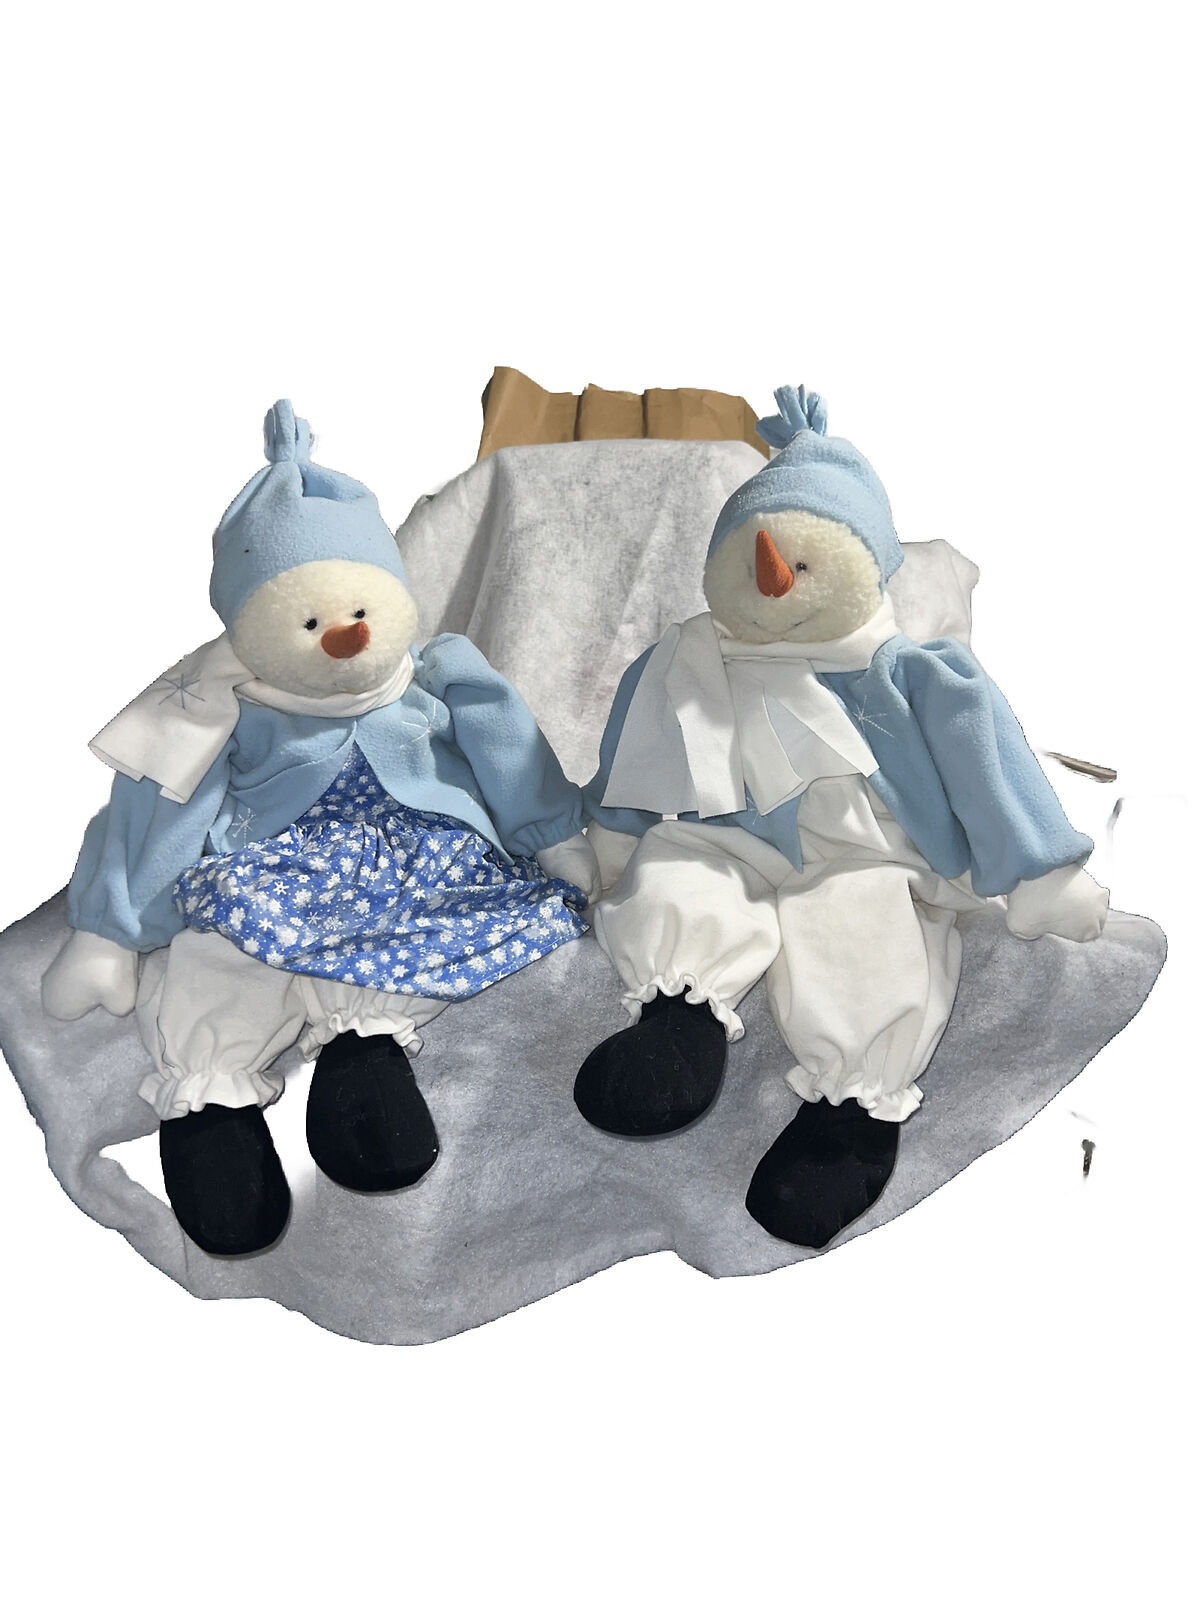 Snowman Couple Vintage Dressed in Pale Blue Outfits Large Size